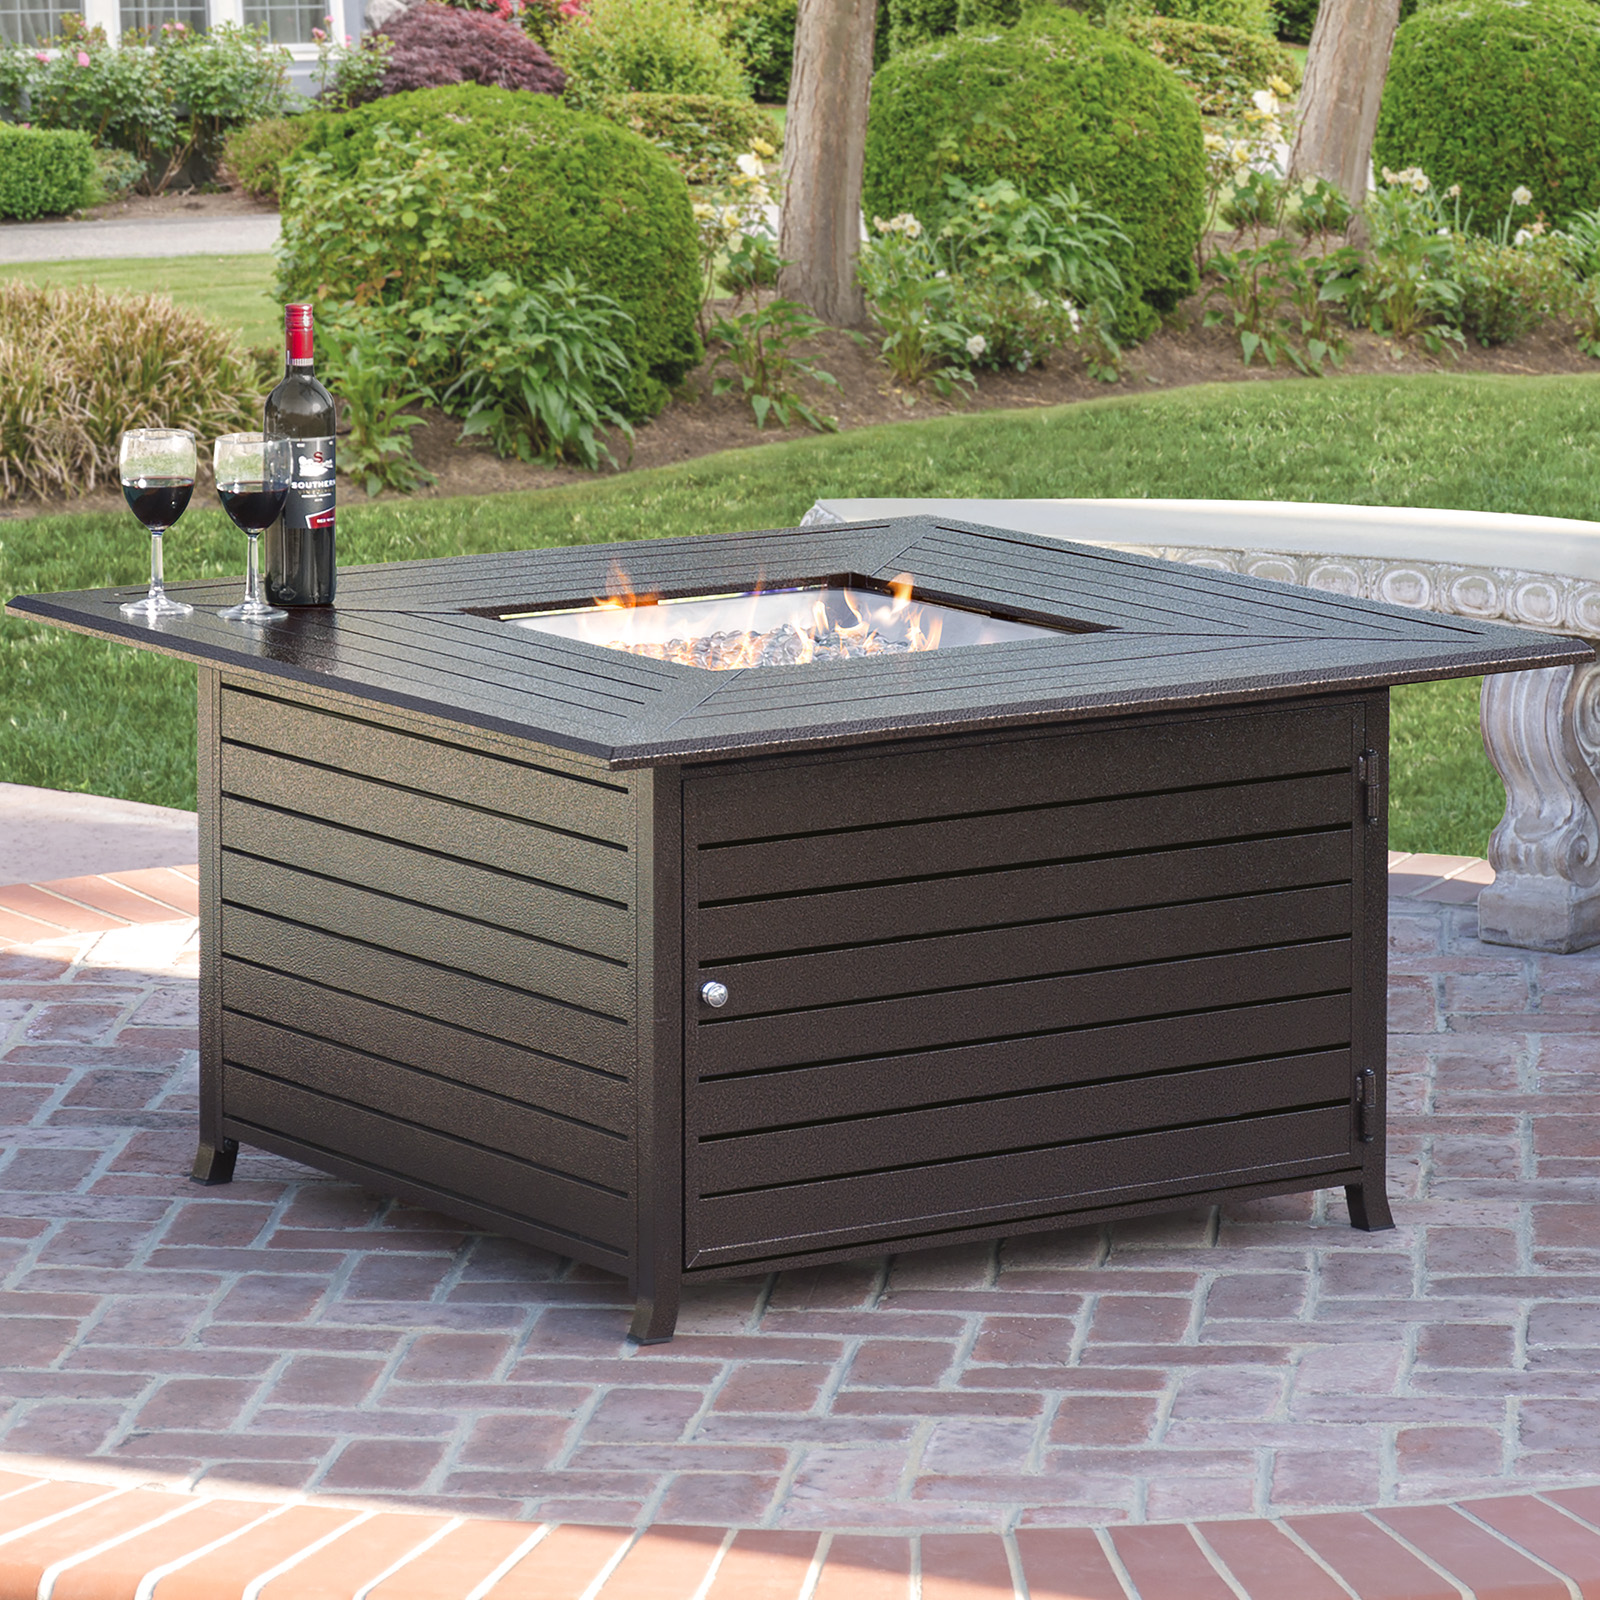 BCP Extruded Aluminum Fire Pit Table - Brown 3808894505543 | eBay